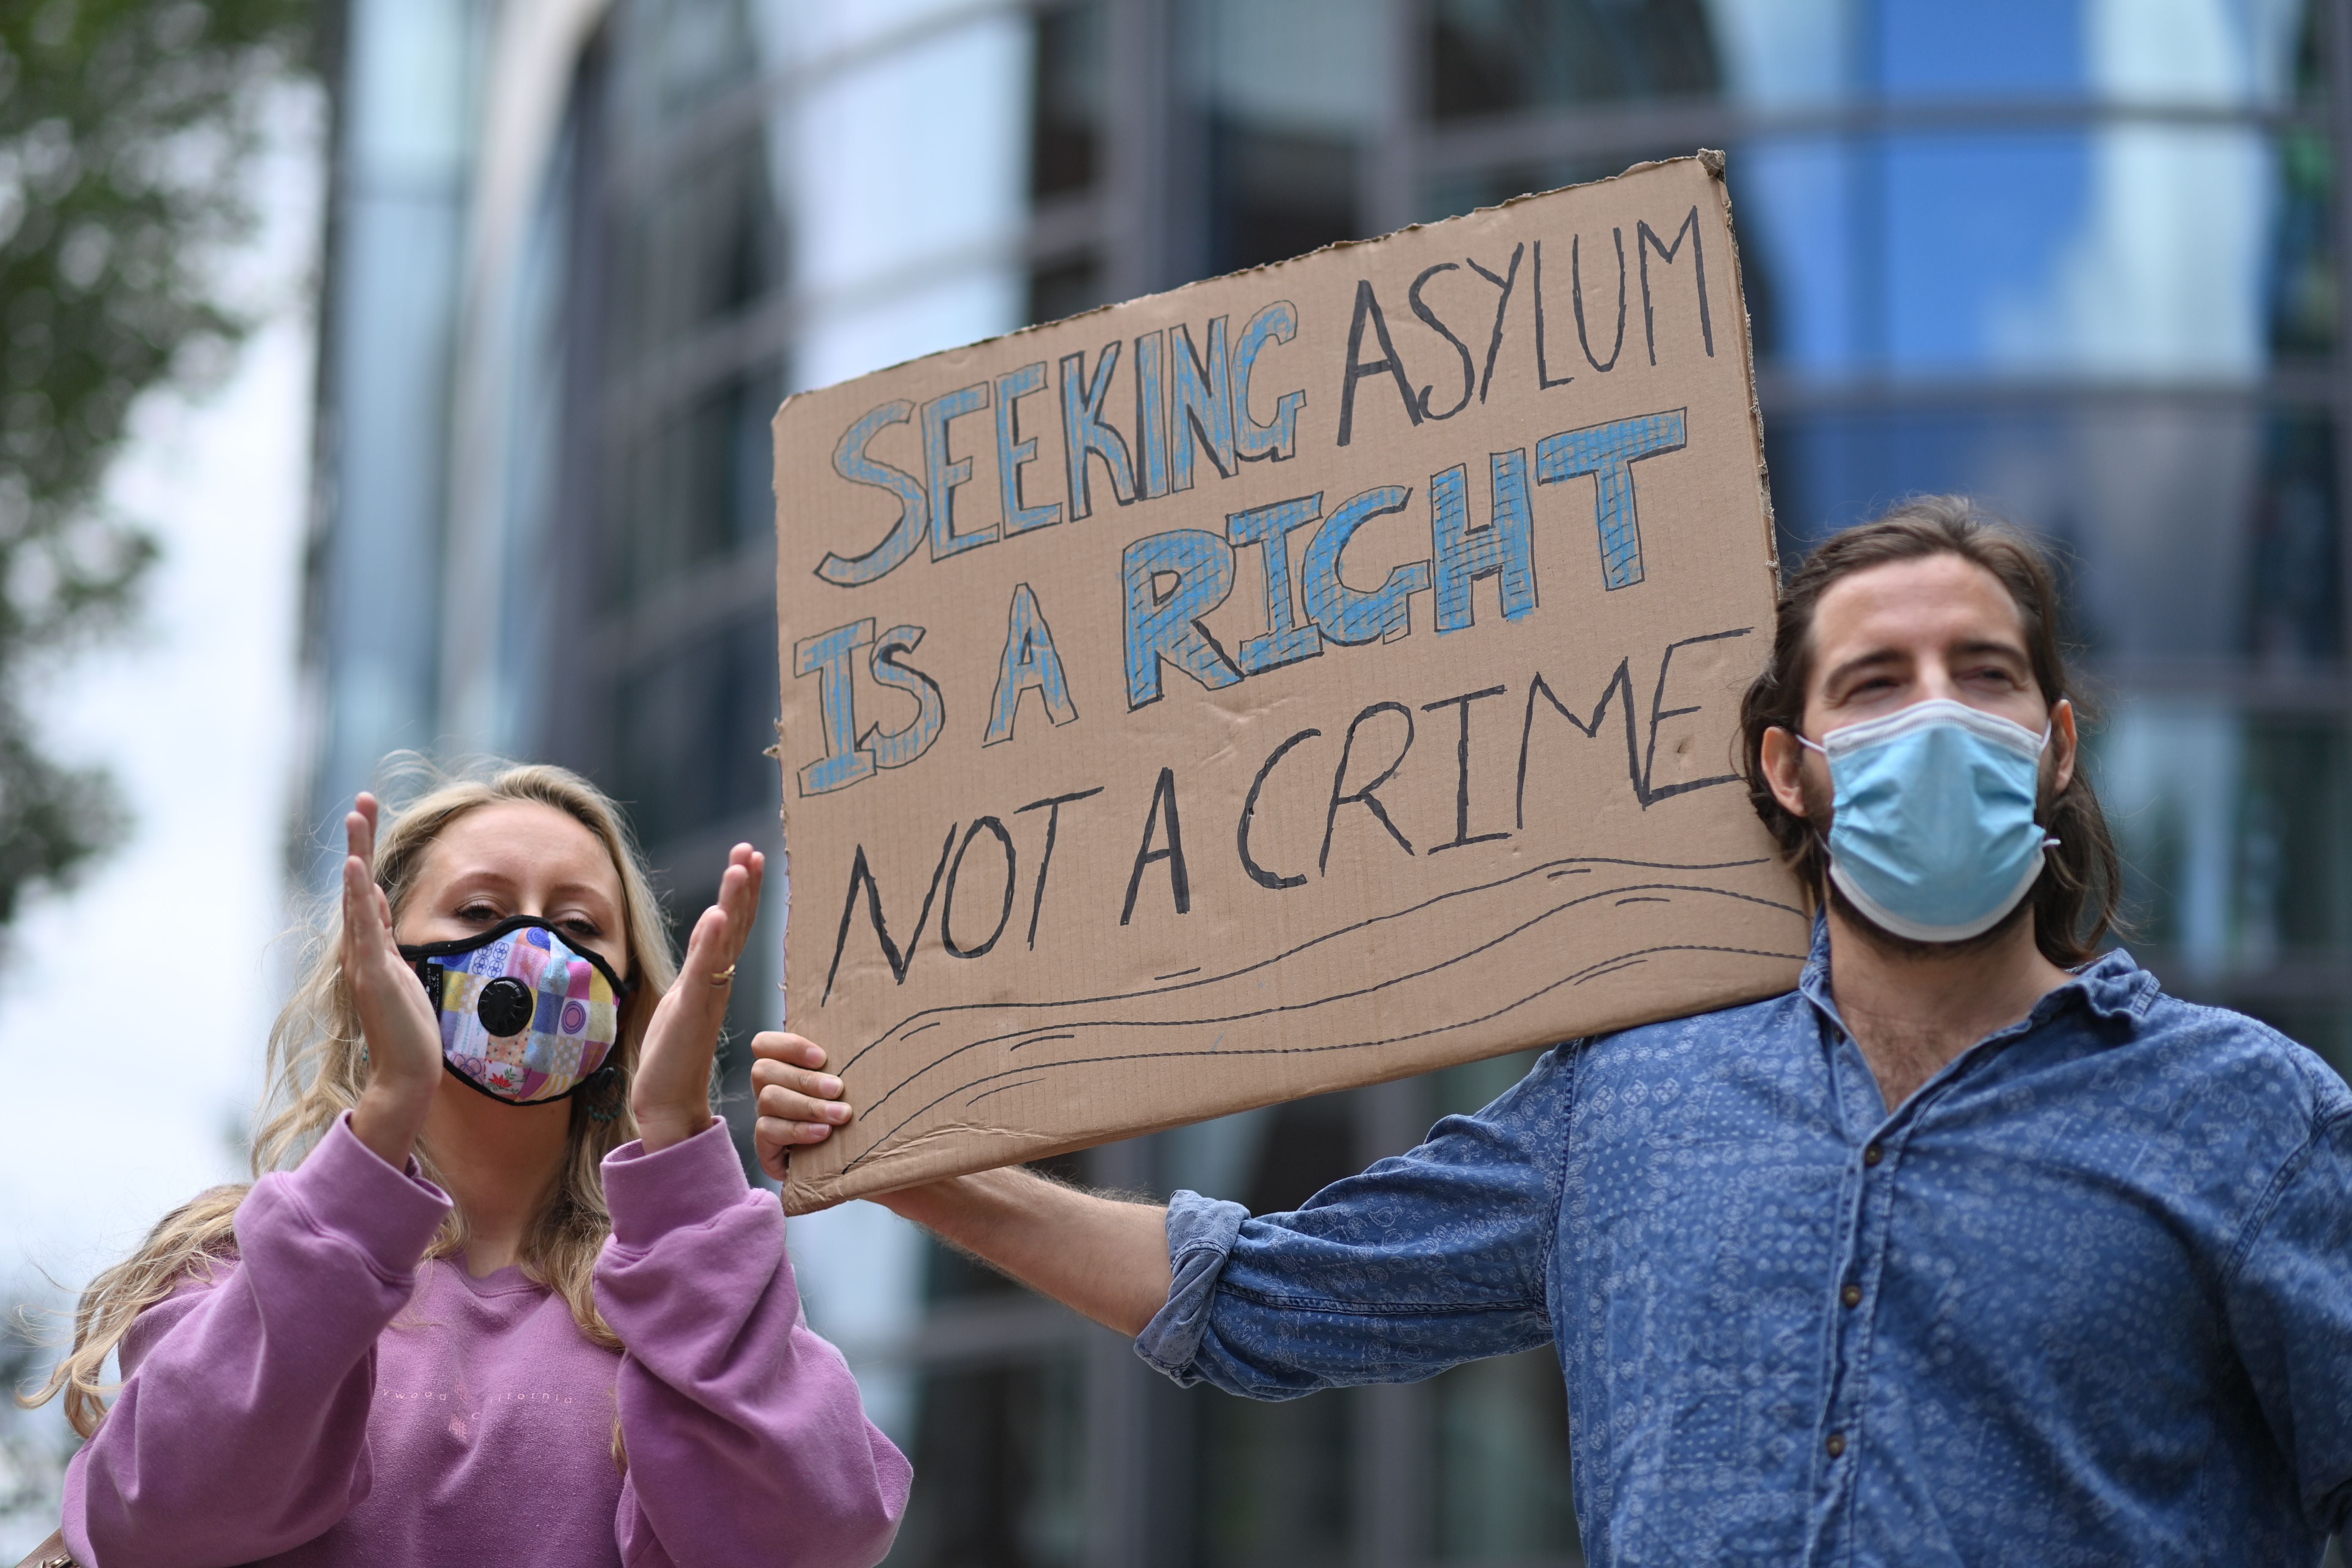 Protesters carry a placard at a demonstration to highlight conditions inside Brook House immigration removal centre and removals, outside the Home Office in London on 23 August, 2020. 